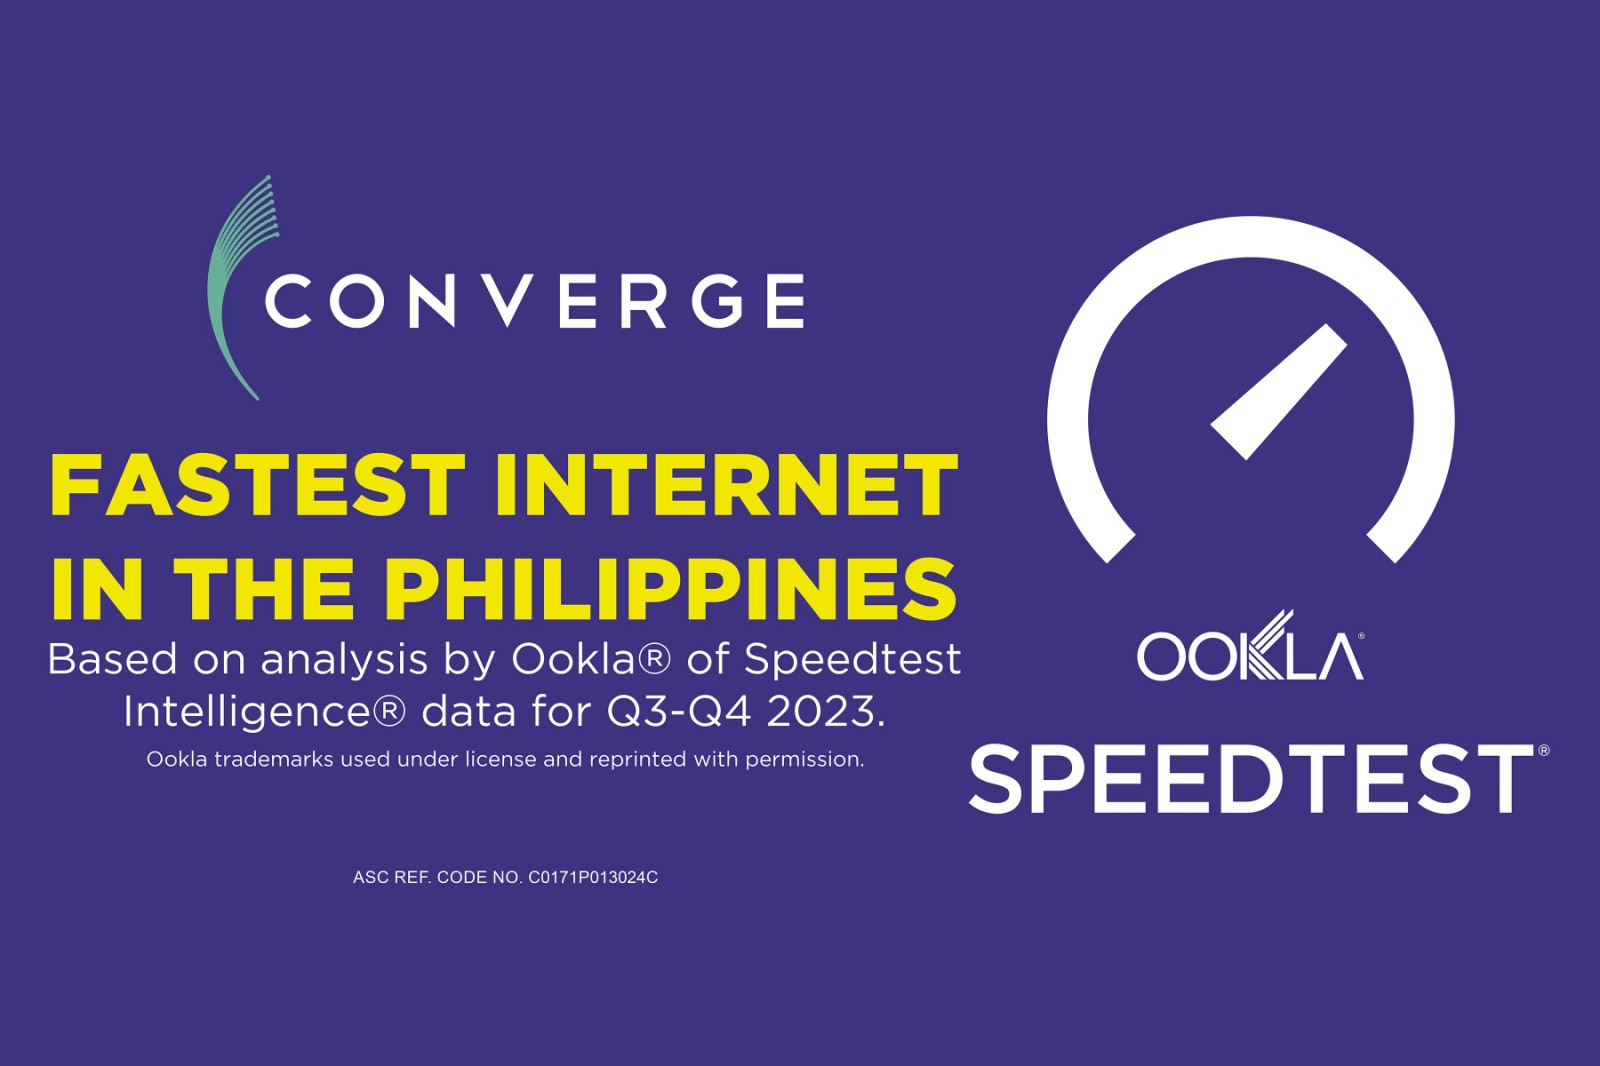 Converge, fastest internet in the Philippines.